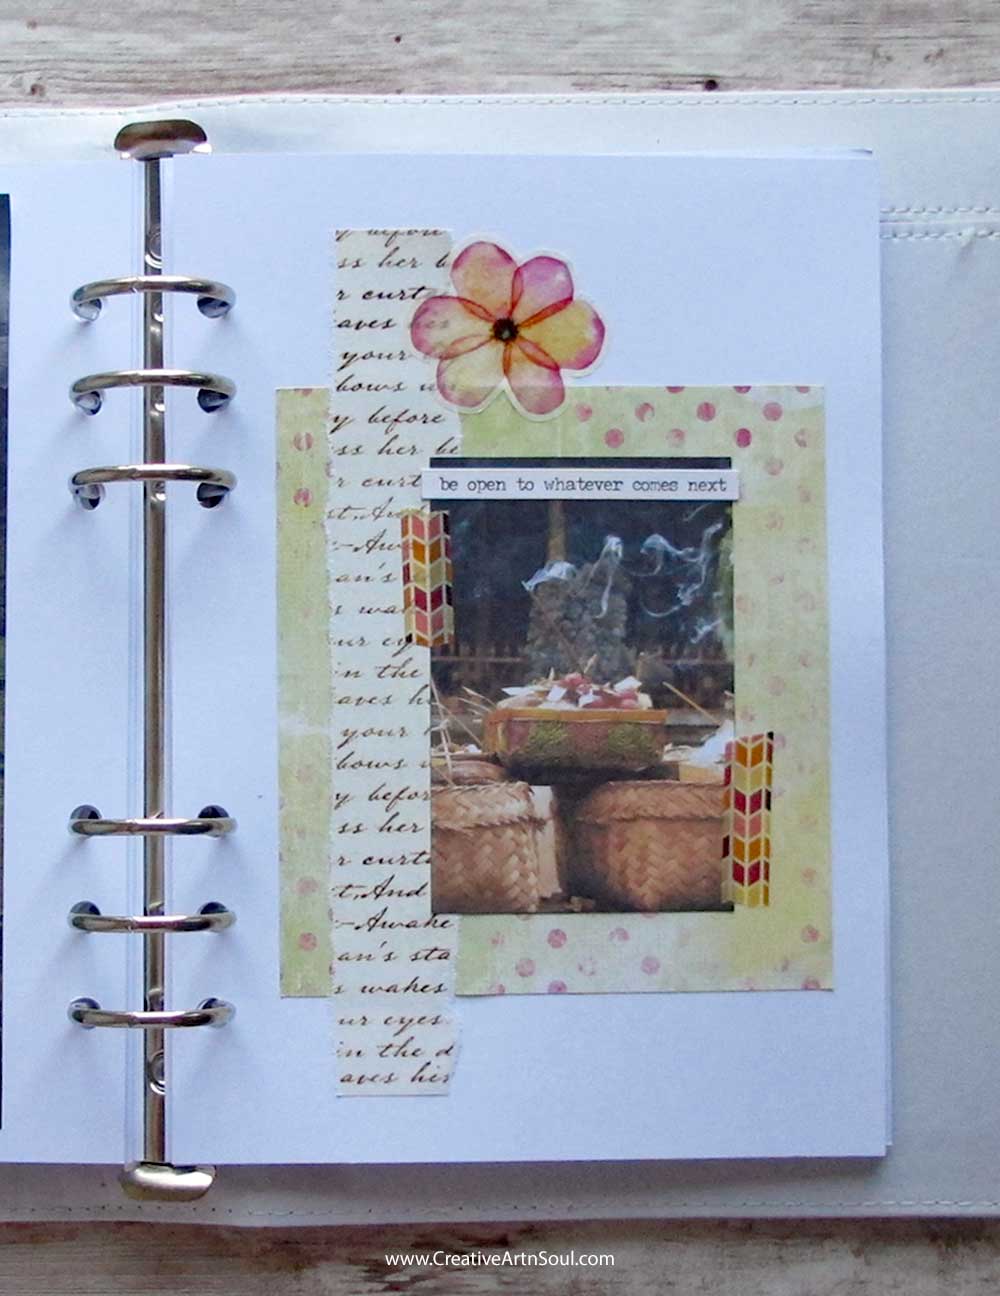 How to Make a Vision Board Journal